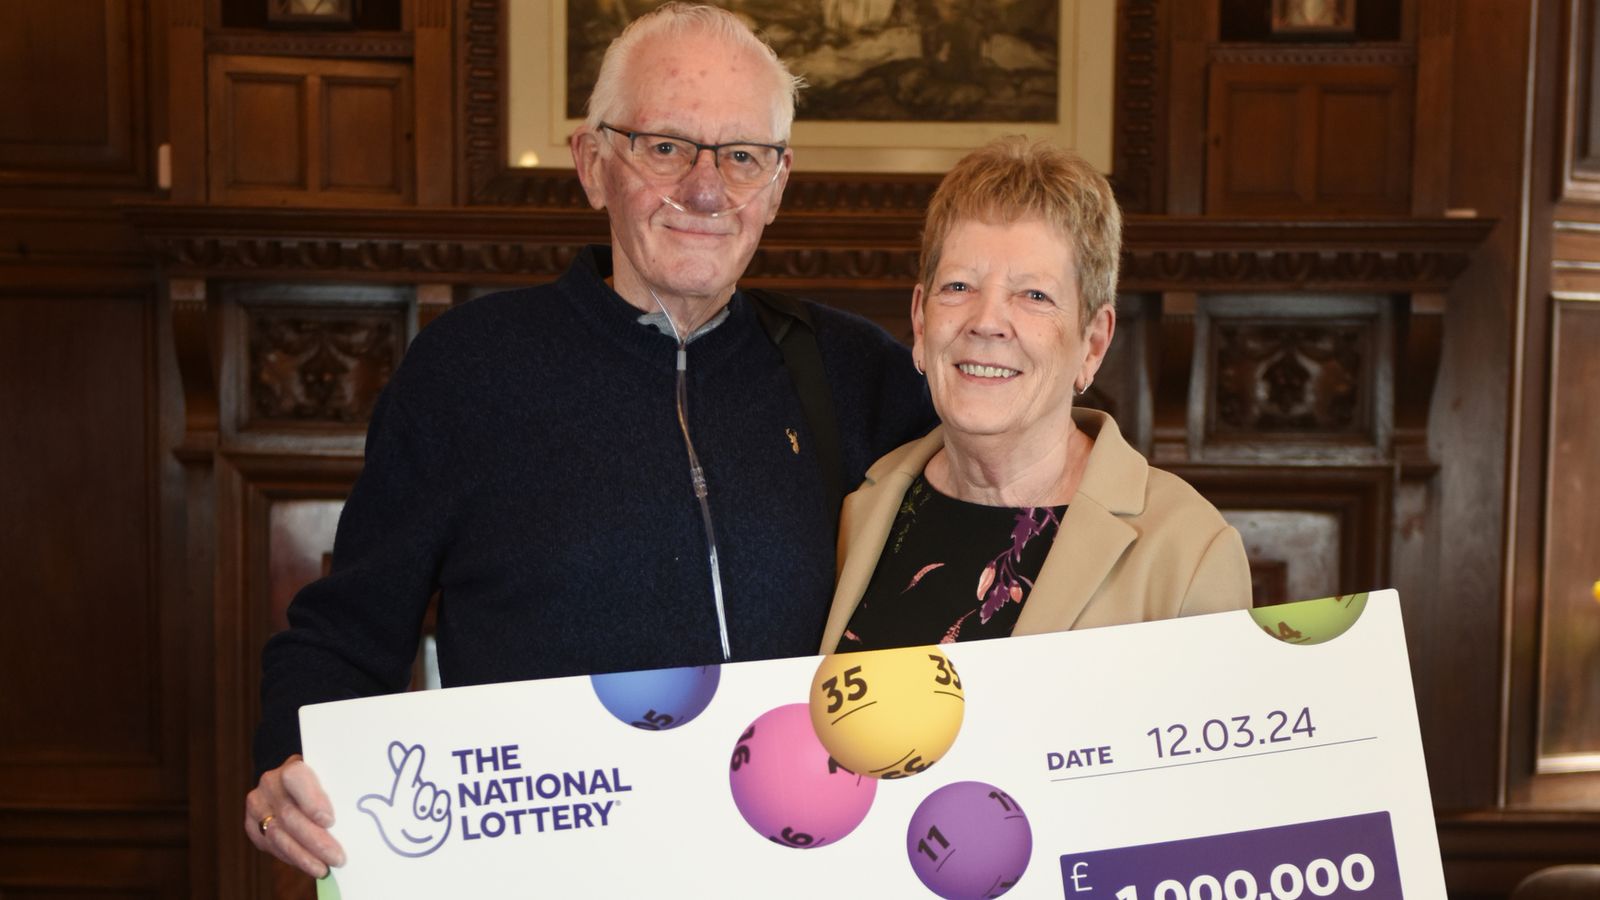 'i thought it was a scam': woman who won £1m on lottery to buy new home with terminally ill husband